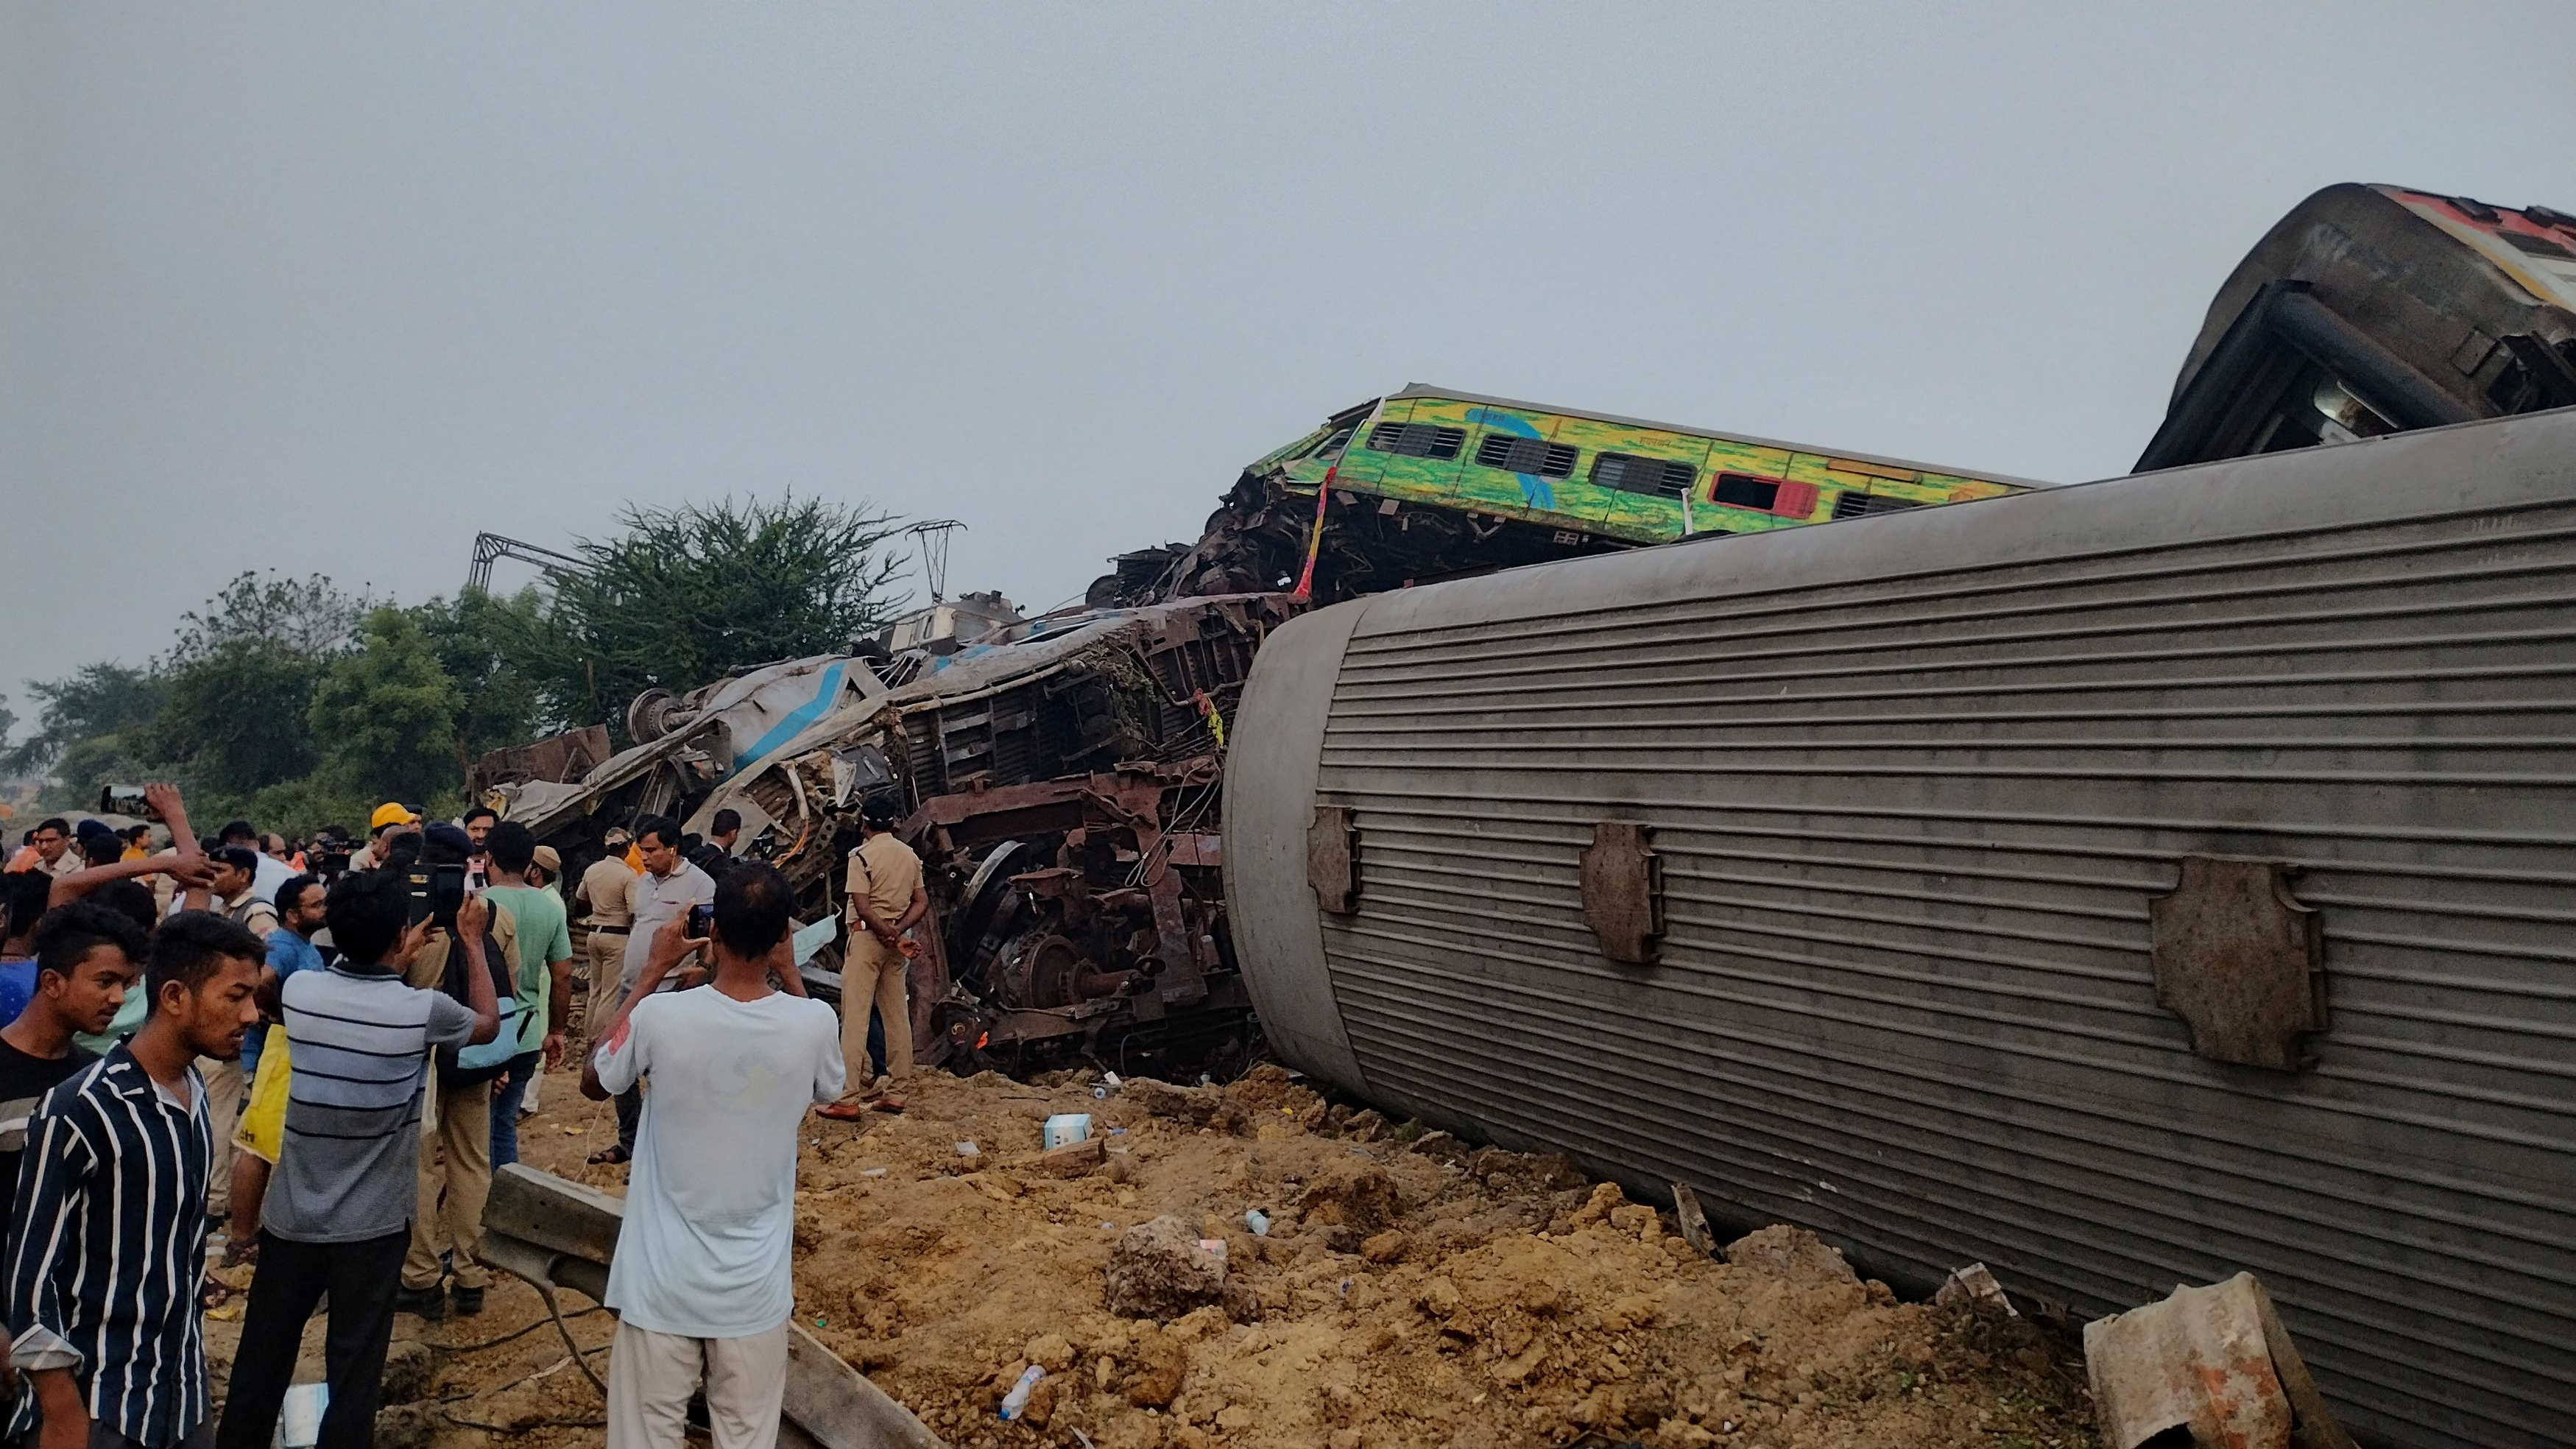 Onlookers and rescue workers stand next to damaged coaches, after trains collided in Balasore, India June 3, 2023, in this picture obtained from social media. /Reuters